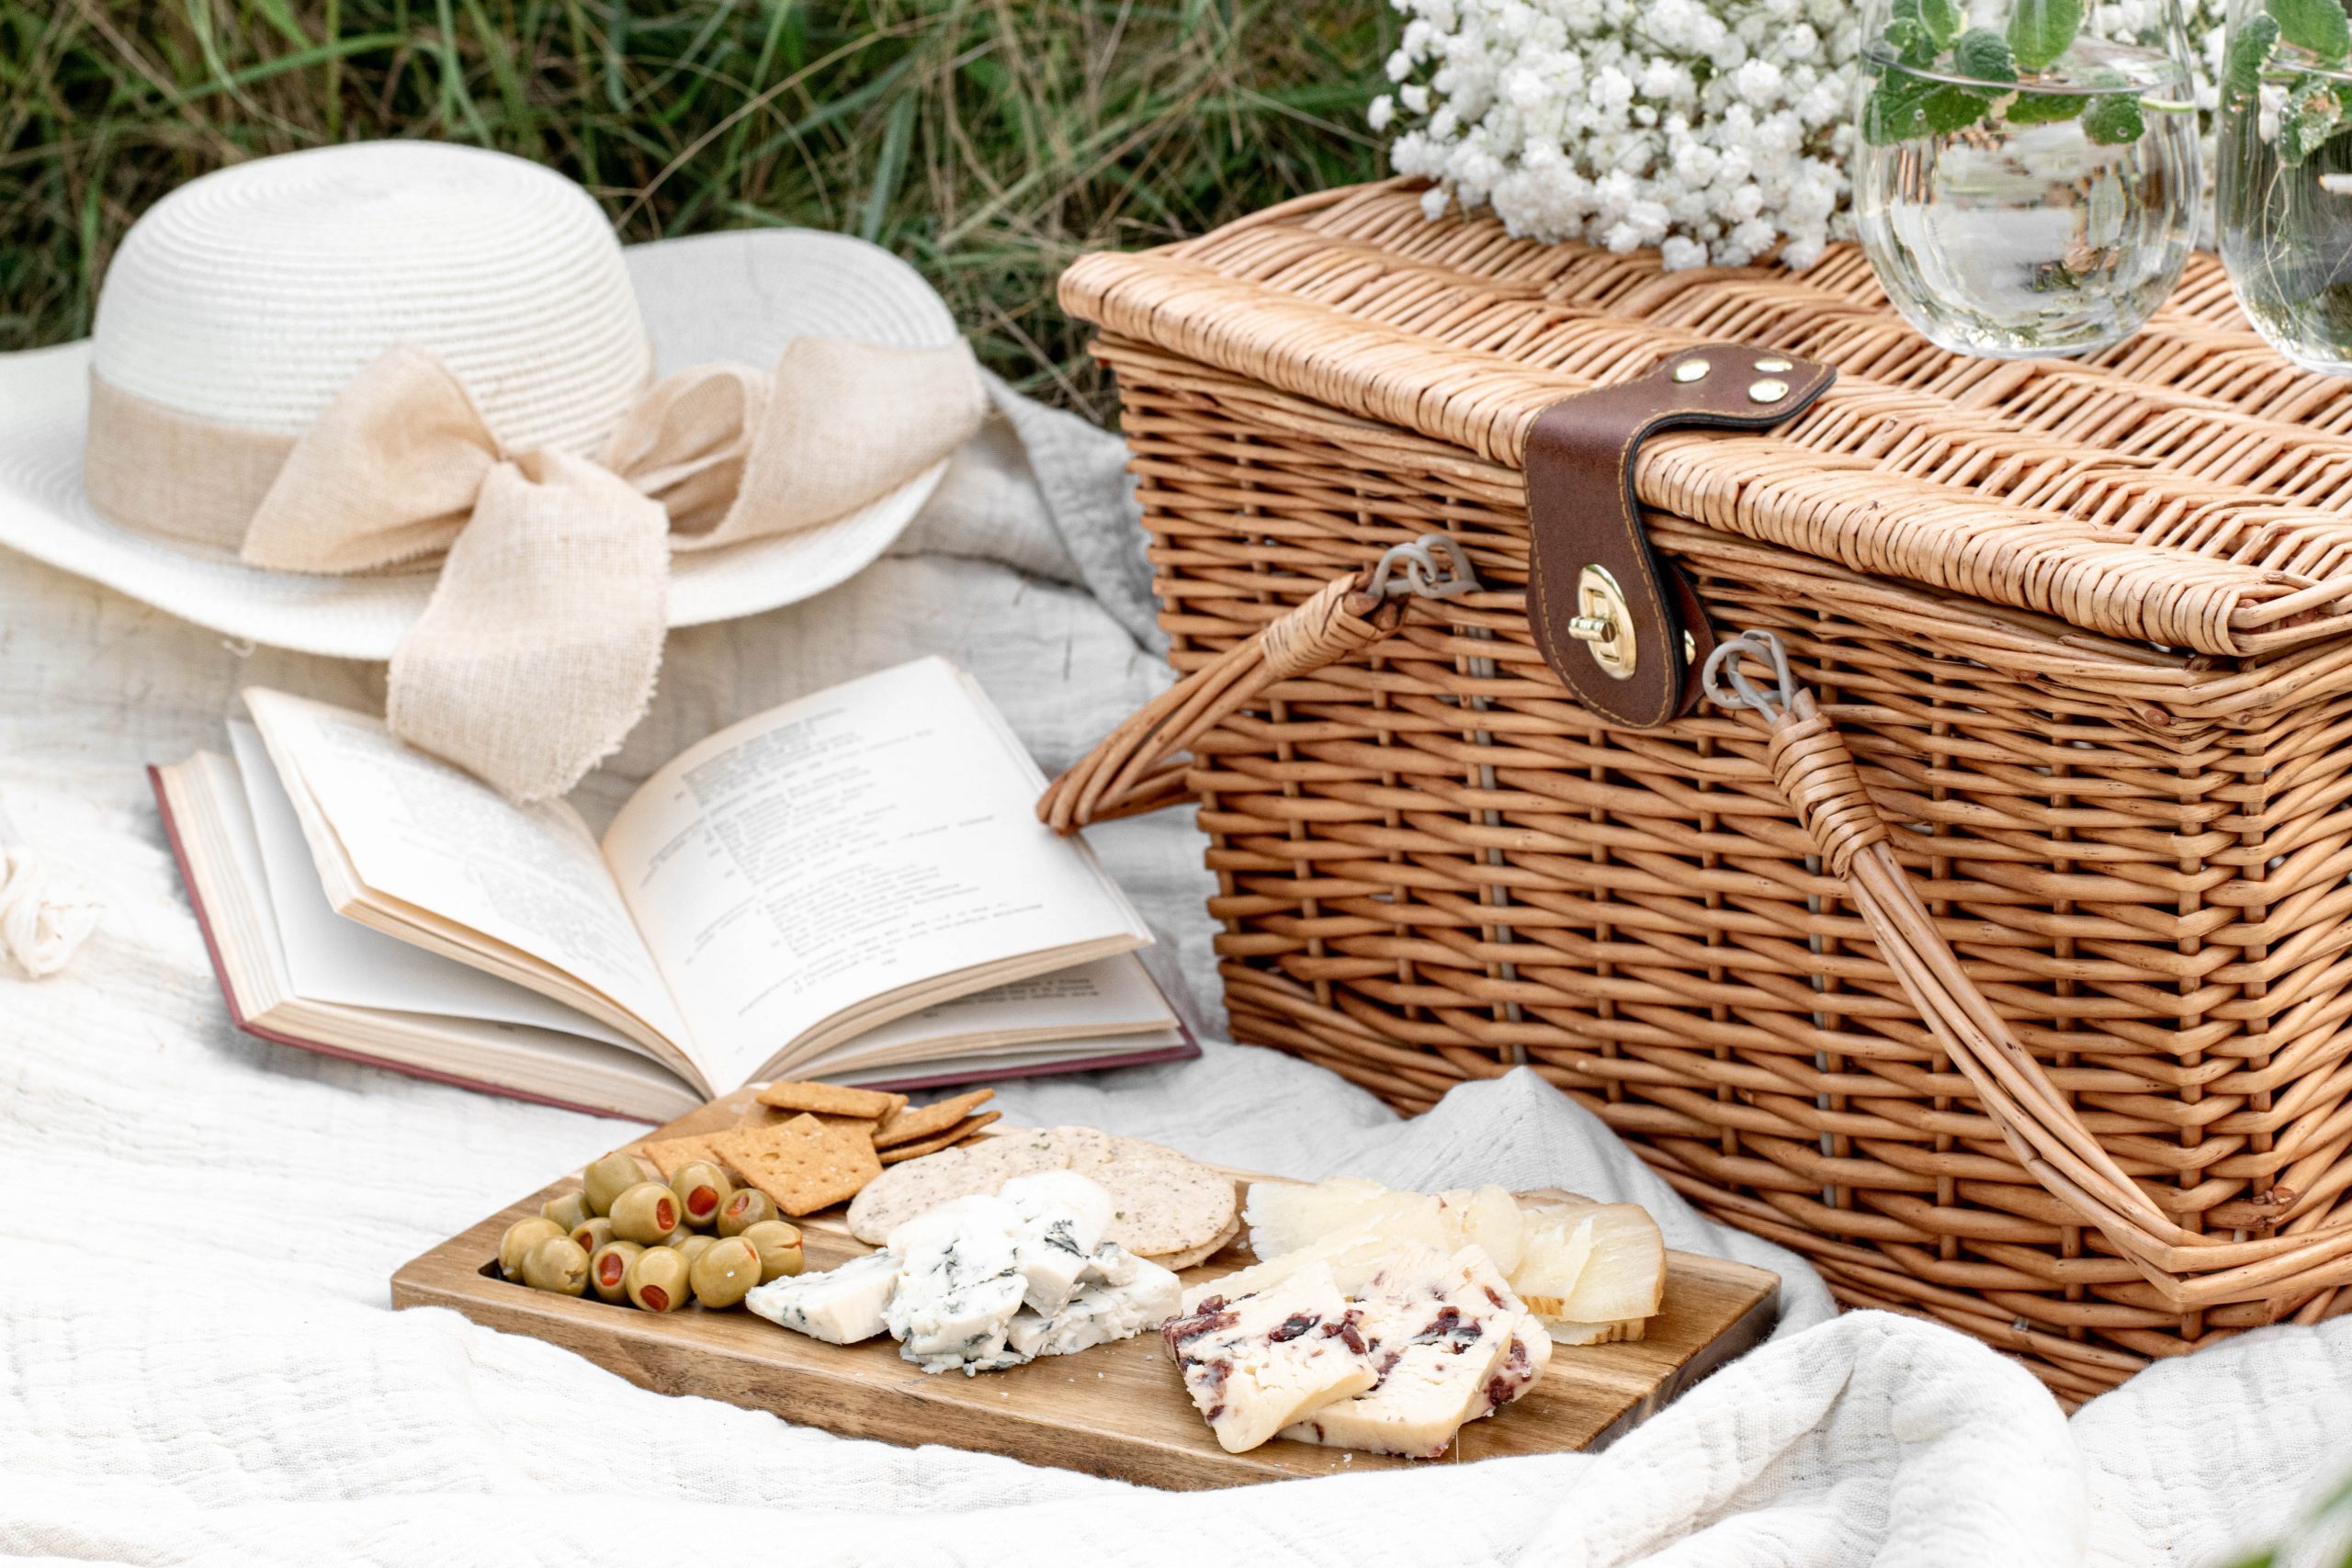 A picnic platter of cheese and crackers next to a book, a ladies straw hat and a picnic basket.